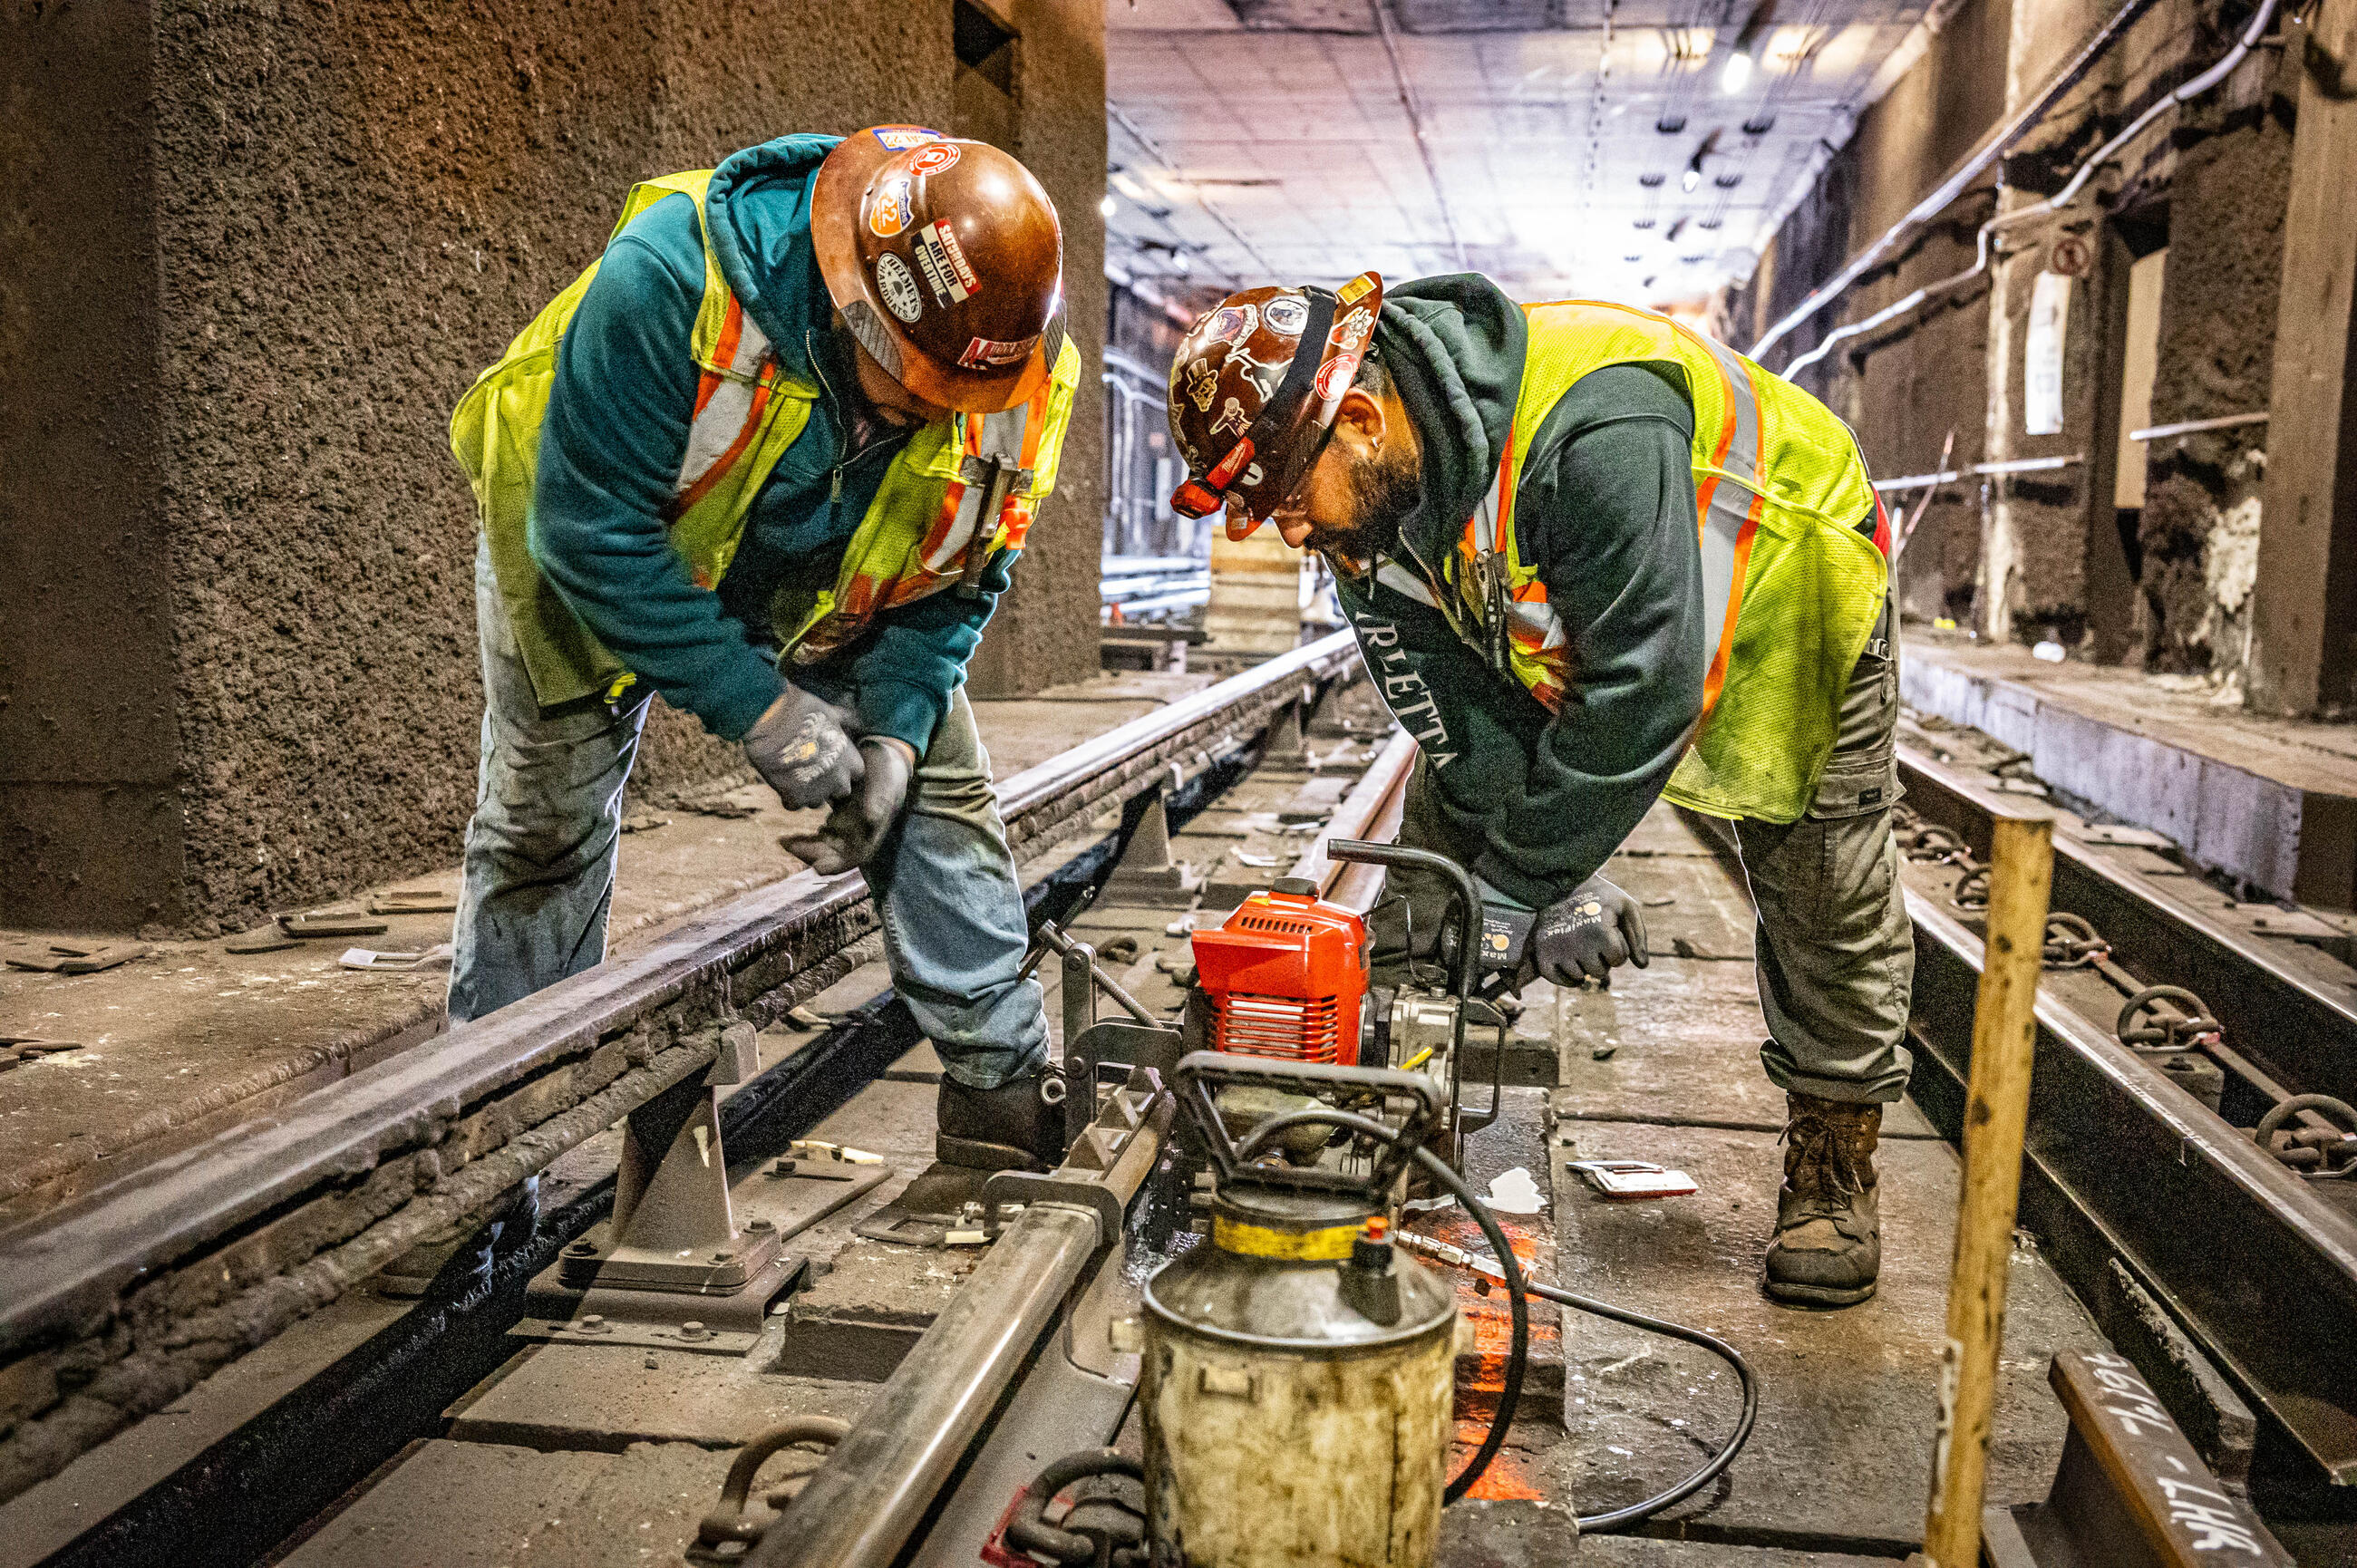 Crews performed track work on the Red Line. Complimentary photo by the MBTA Customer and Employee Experience Department.